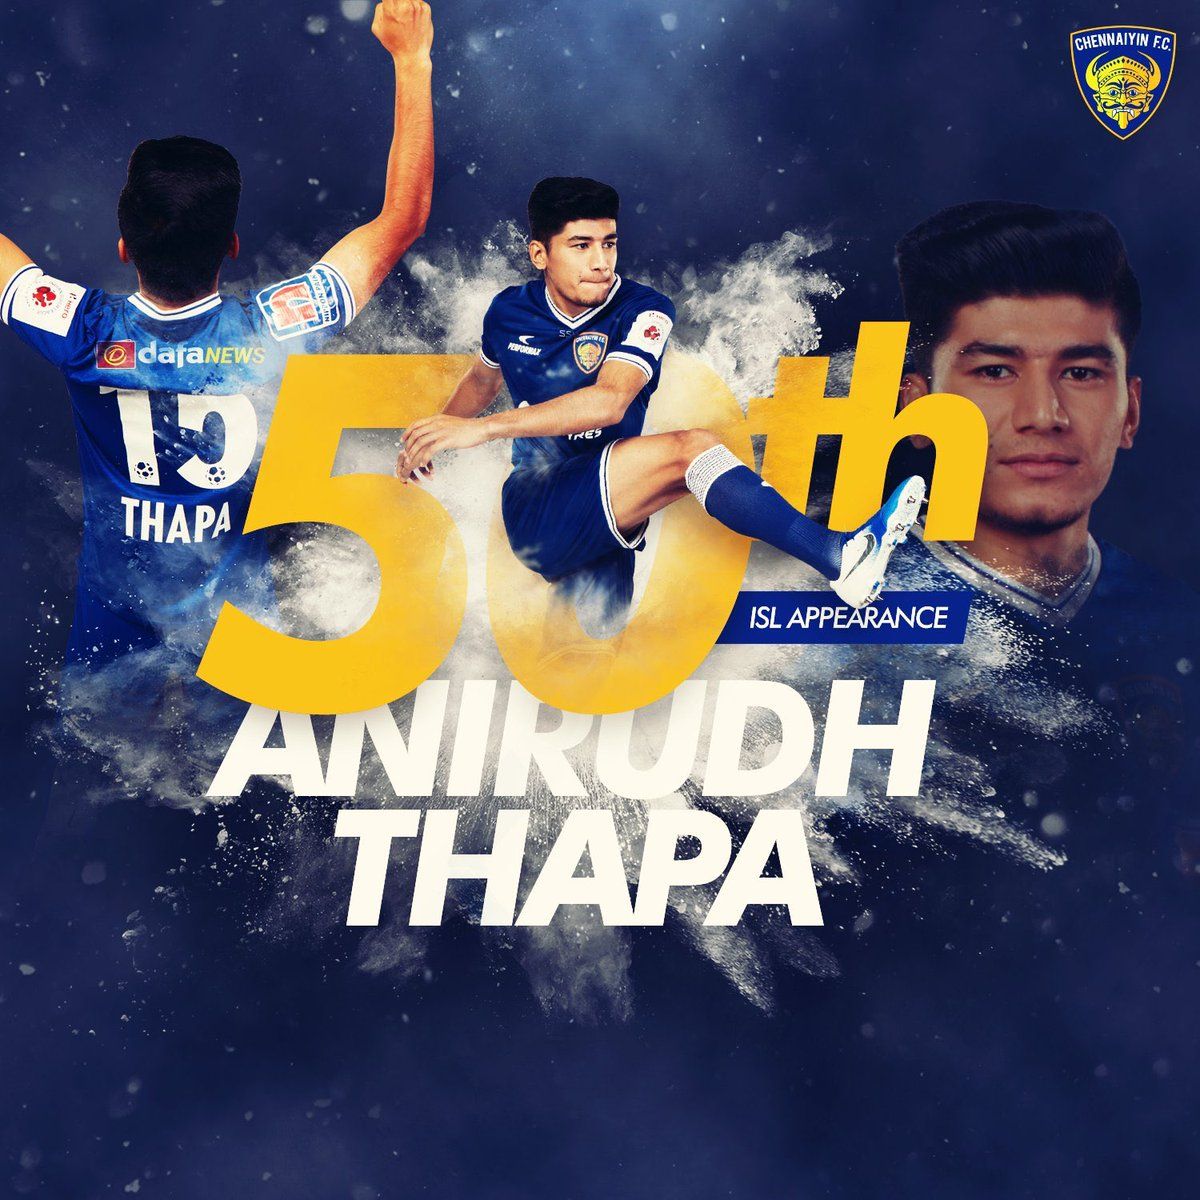 Anirudh Thapa's been a pleasure and a privilege playing 50 matches for Chennaiyan ❤ It would not have been possible with the support of the incredible team and staff